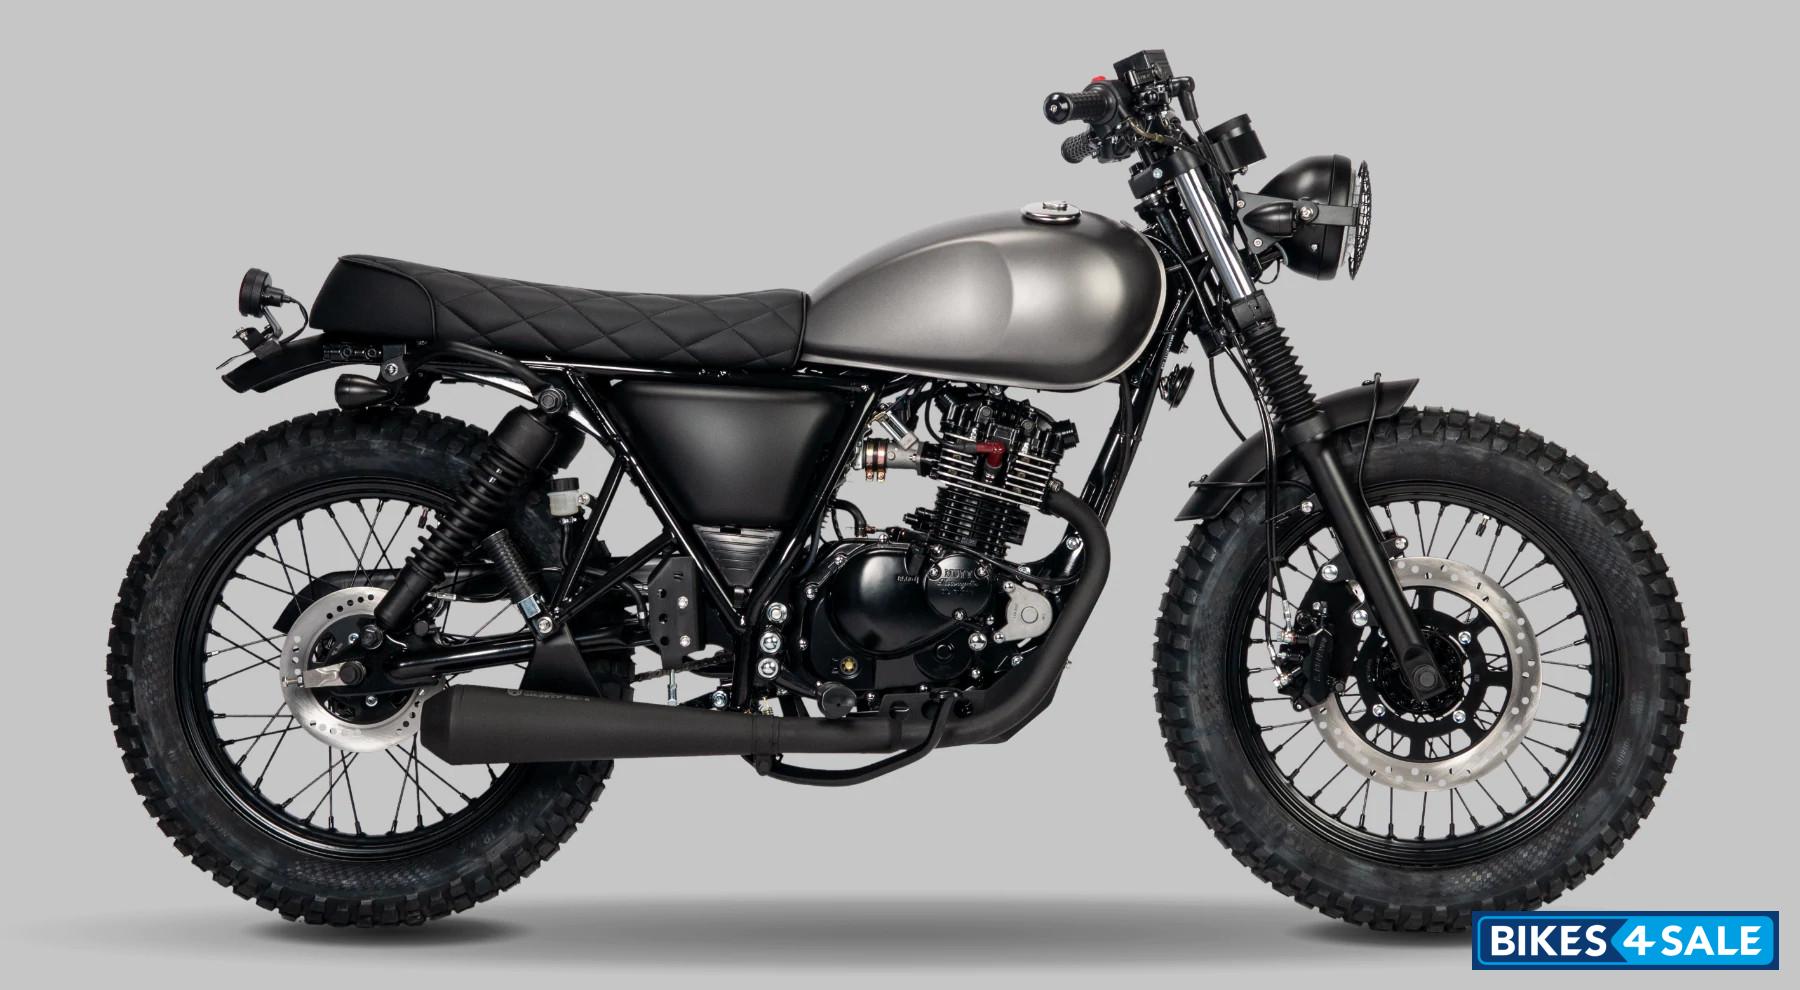 Mutt Fat Sabbath 125CC Motorcycle Price, Specs and Features - Bikes4Sale